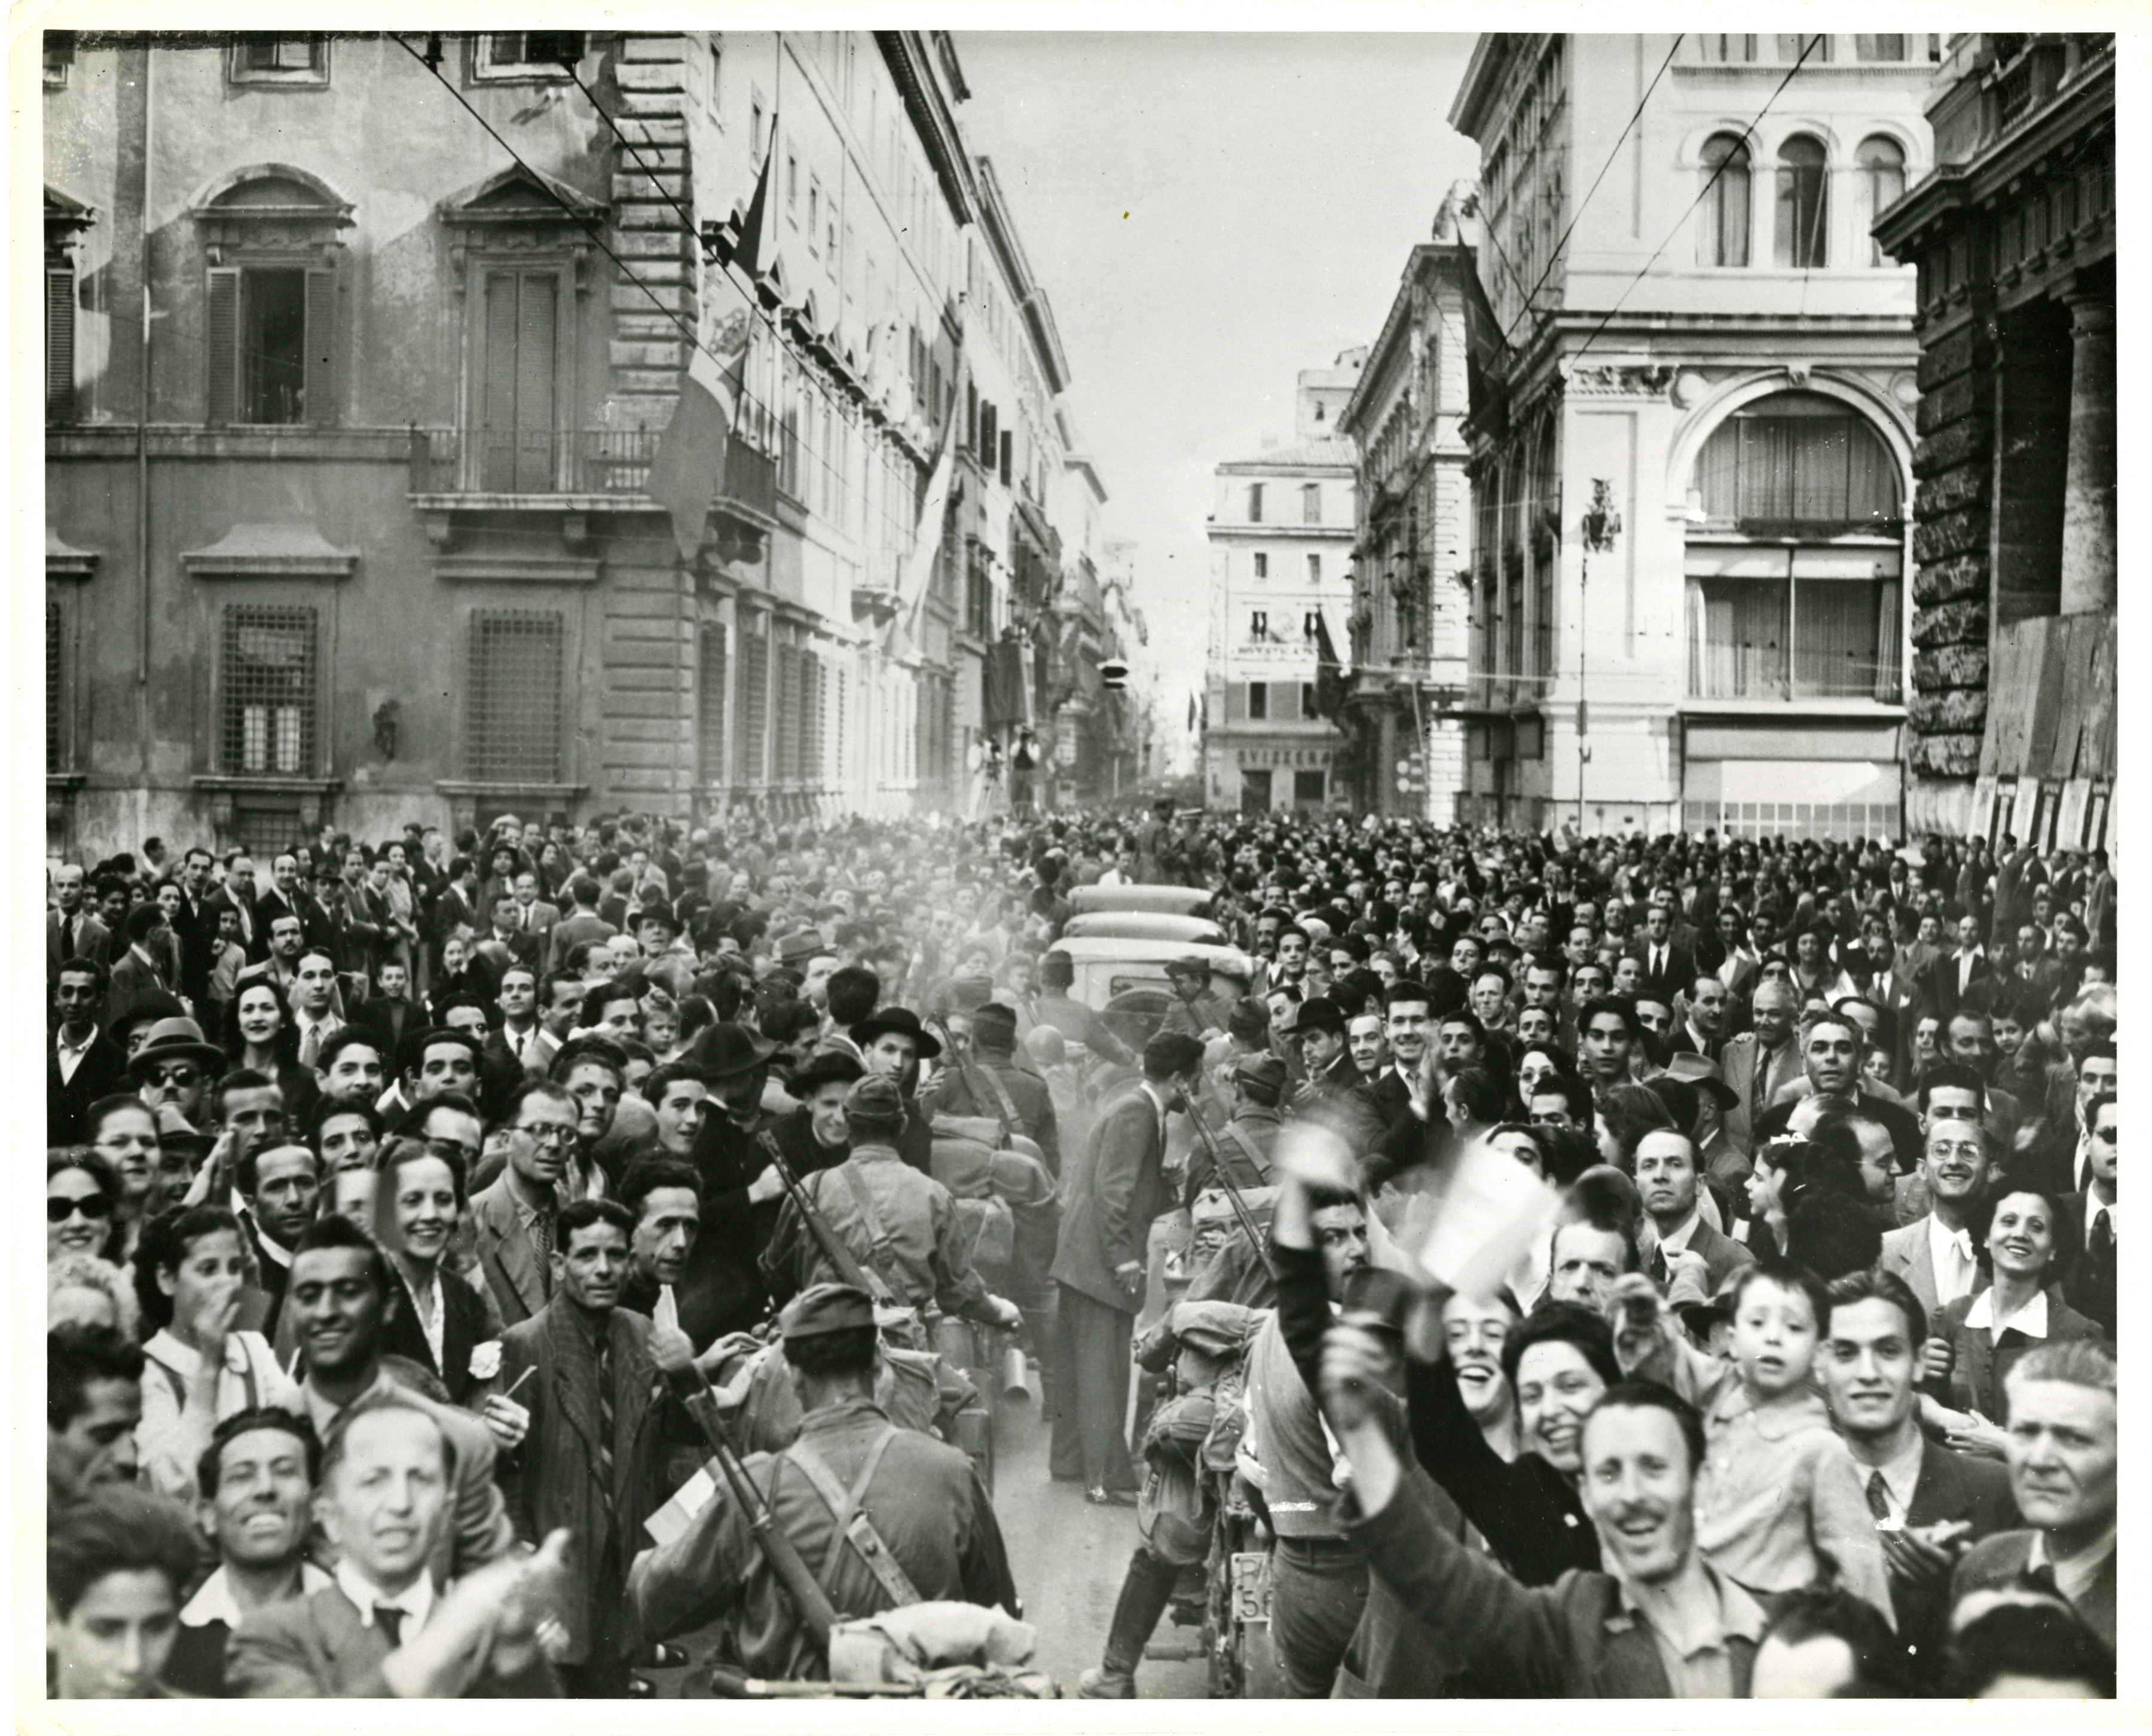 Large crowd of people celebrate in the street, ETO, 1945 | The Digital ...